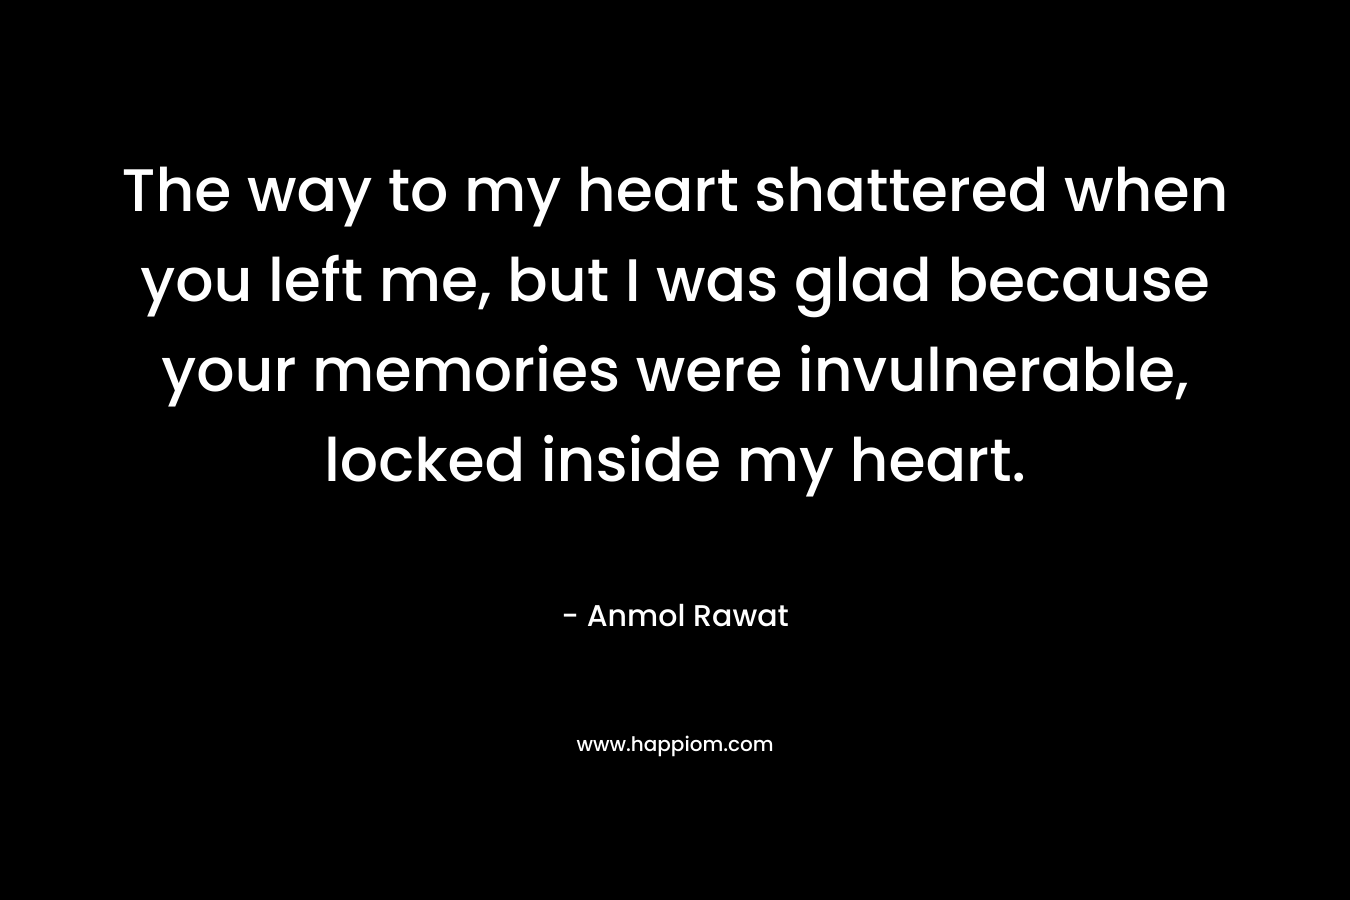 The way to my heart shattered when you left me, but I was glad because your memories were invulnerable, locked inside my heart.